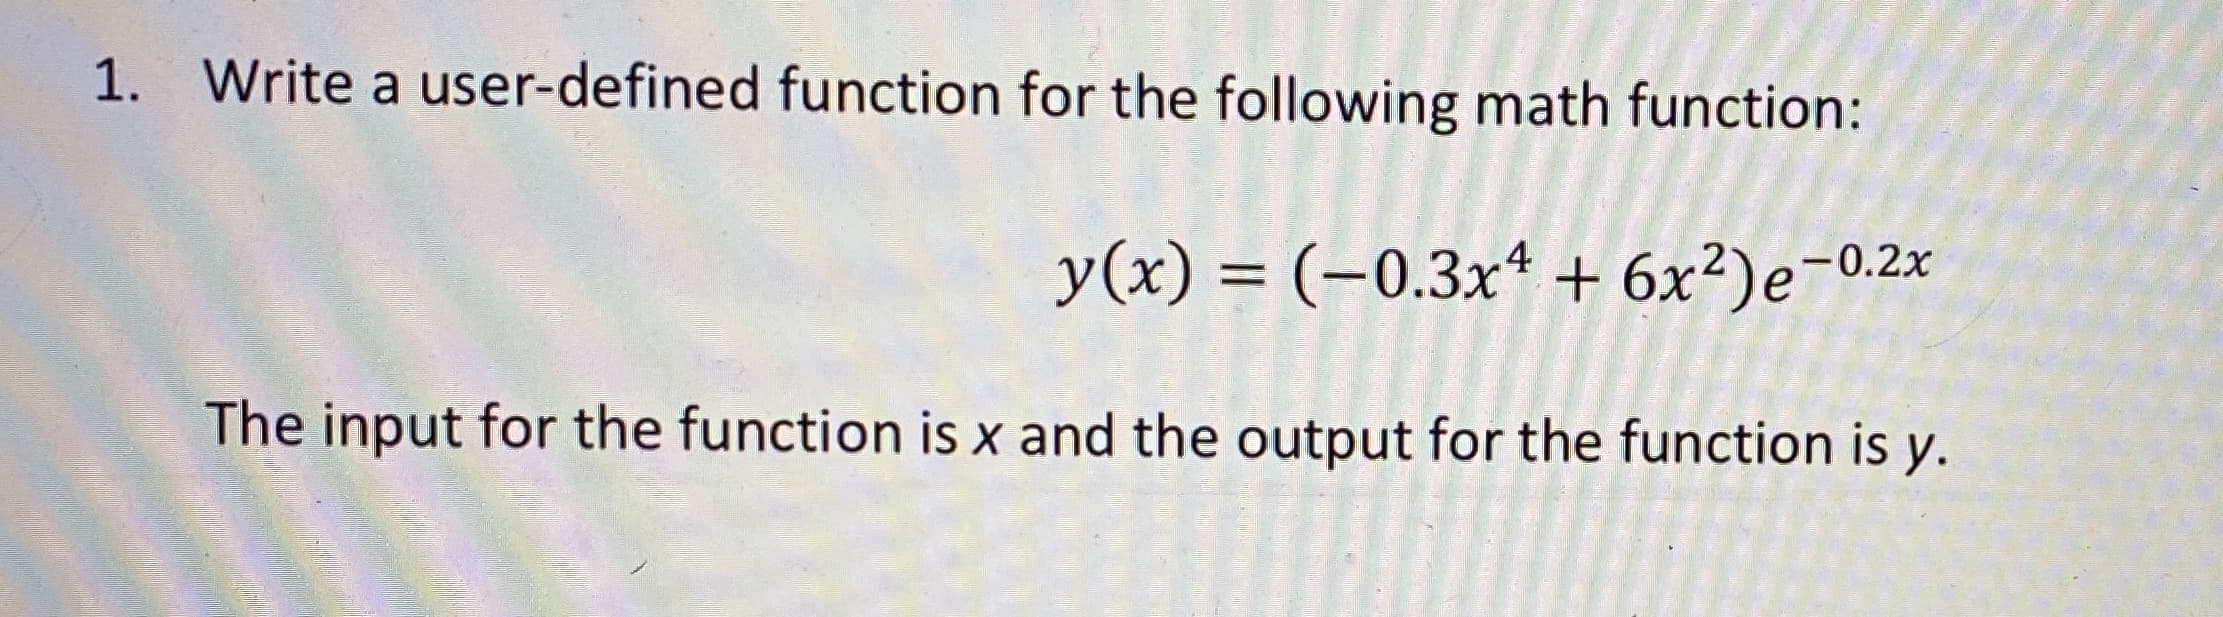 Write a user-defined function for the following math function:
y(x) = (-0.3x* + 6x²)e¬0.2x
The input for the function is x and the output for the function is y.
